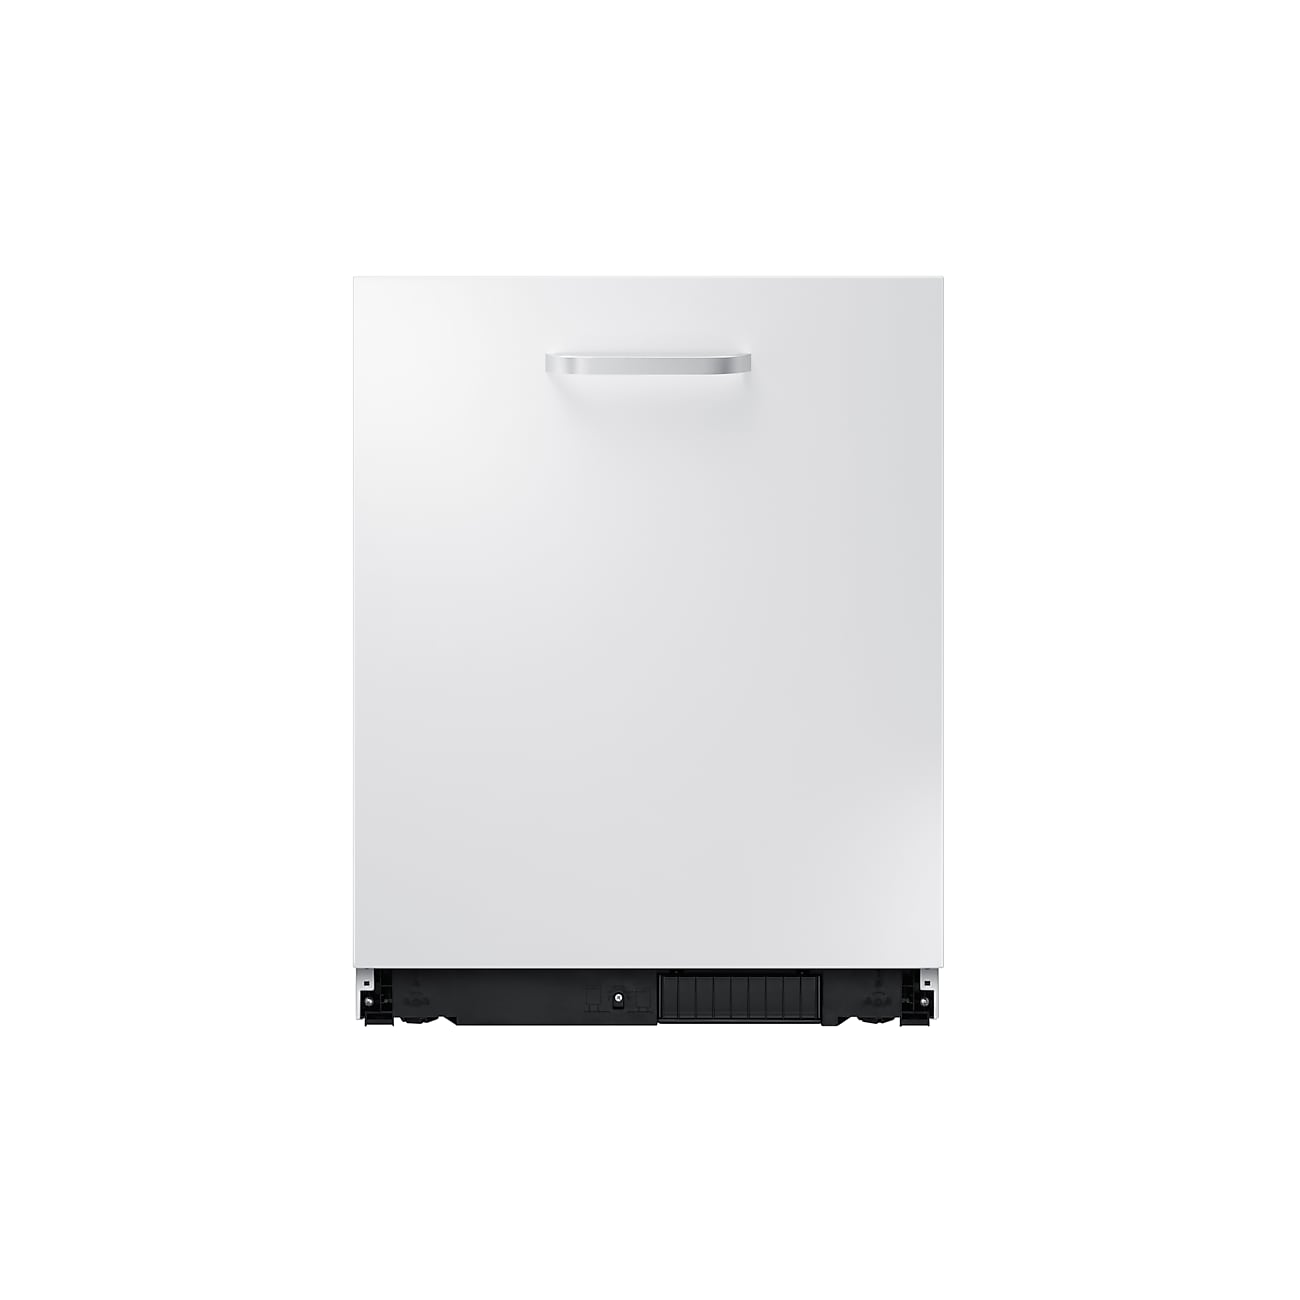 Samsung 2020 Built in Full Size Dishwasher 14 Place Settings in White (DW60M6070IB/EU)